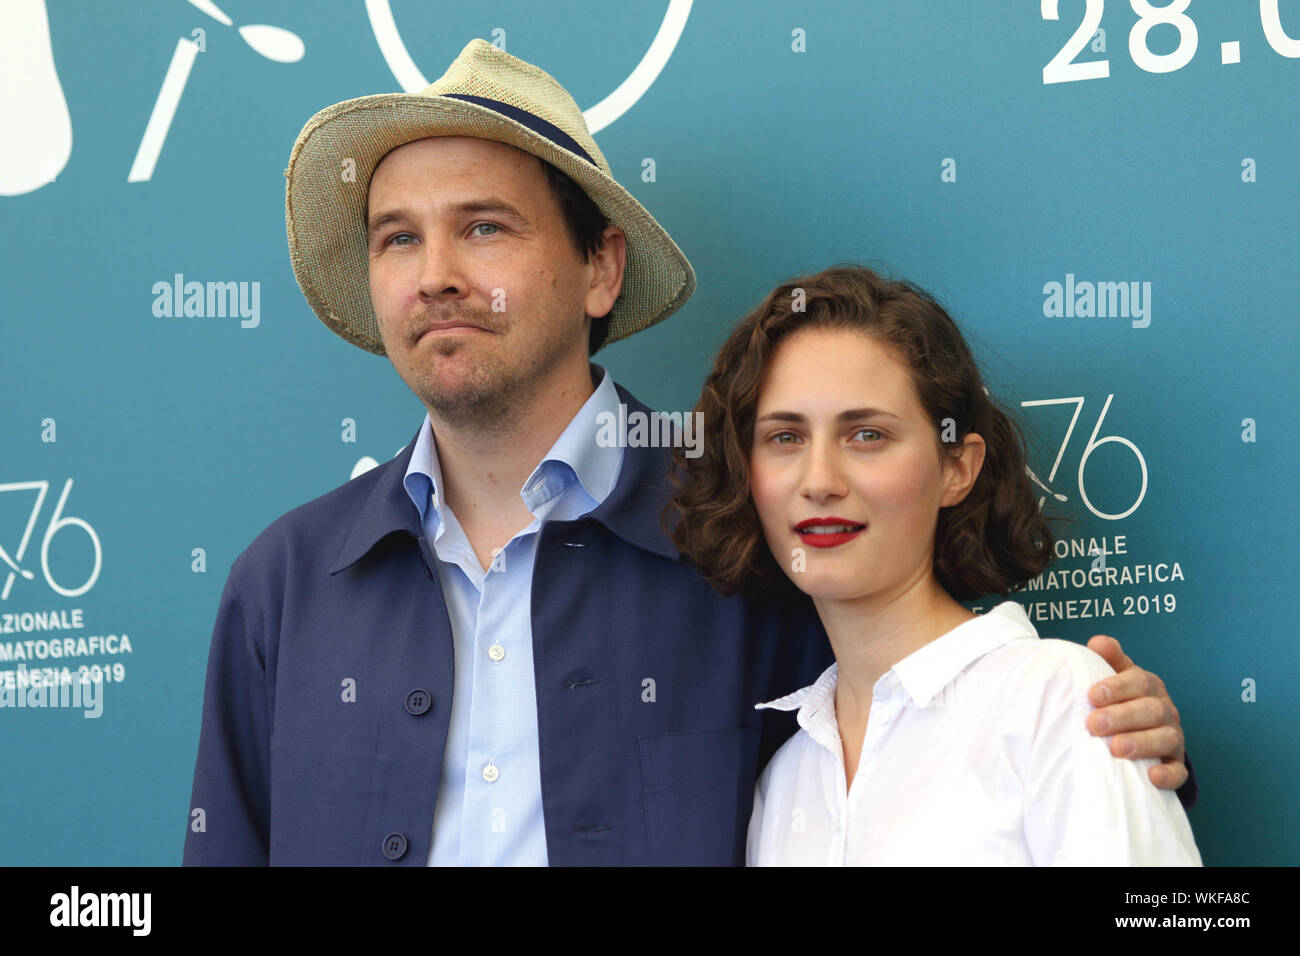 Italy, Lido di Venezia, September 3, 2019 : Anders Hellstrom and Tatiana Delaunay poses during a photocall for the movie 'Om det oandliga' (About endl Stock Photo